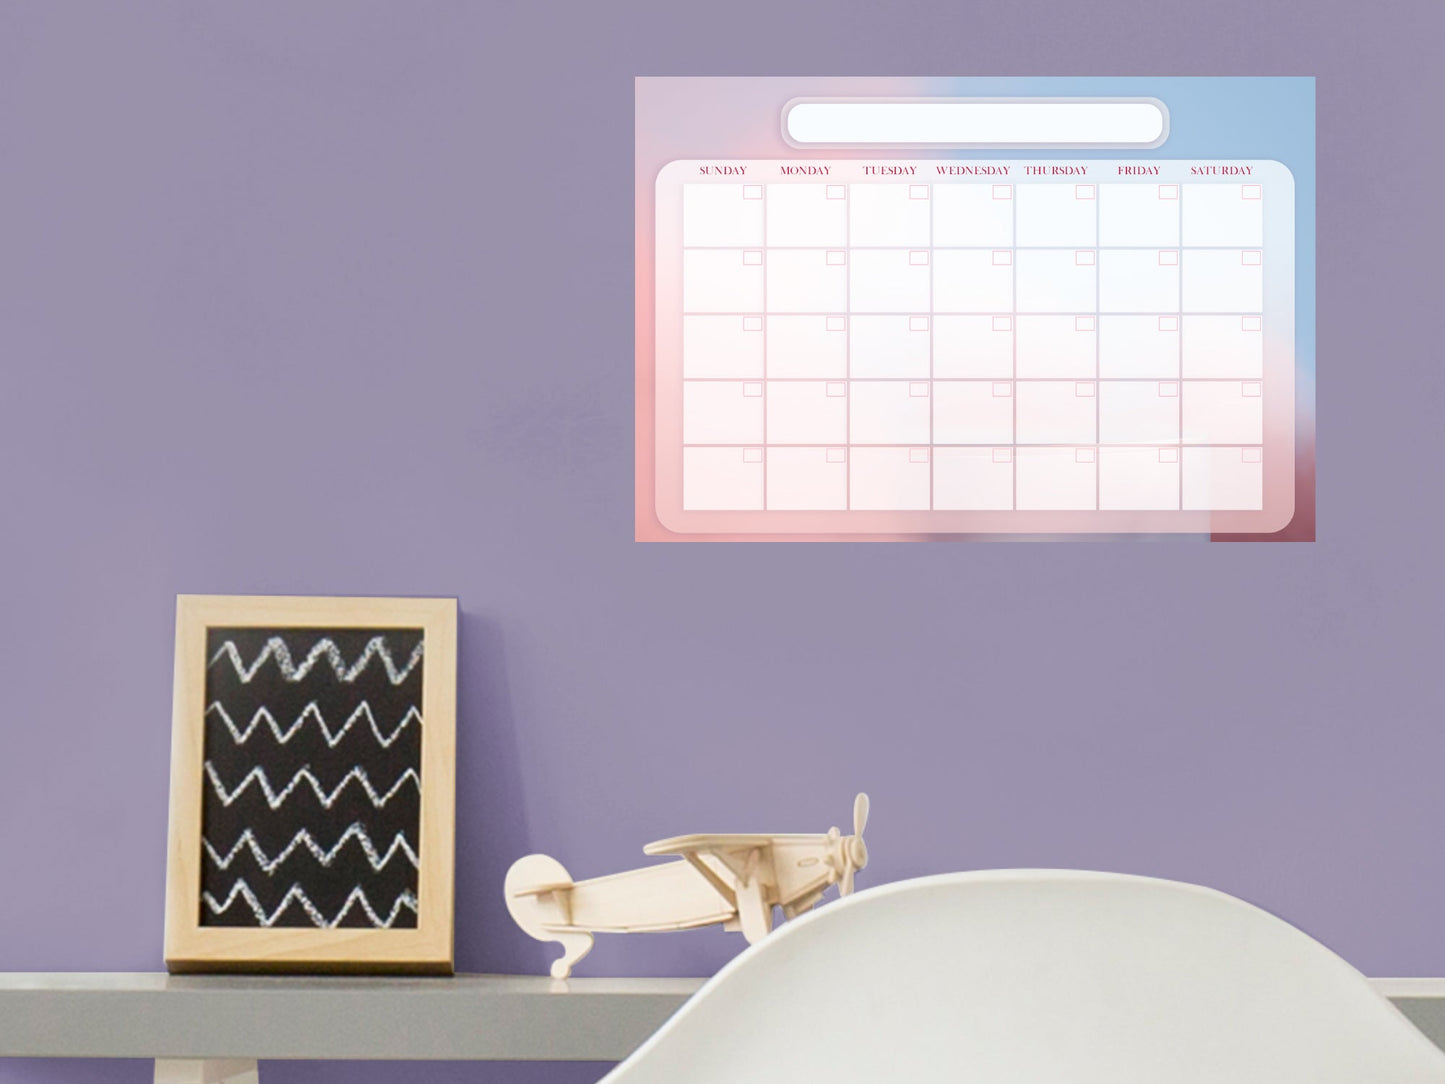 Calendars: Pastel One Month Calendar Dry Erase - Removable Adhesive Decal